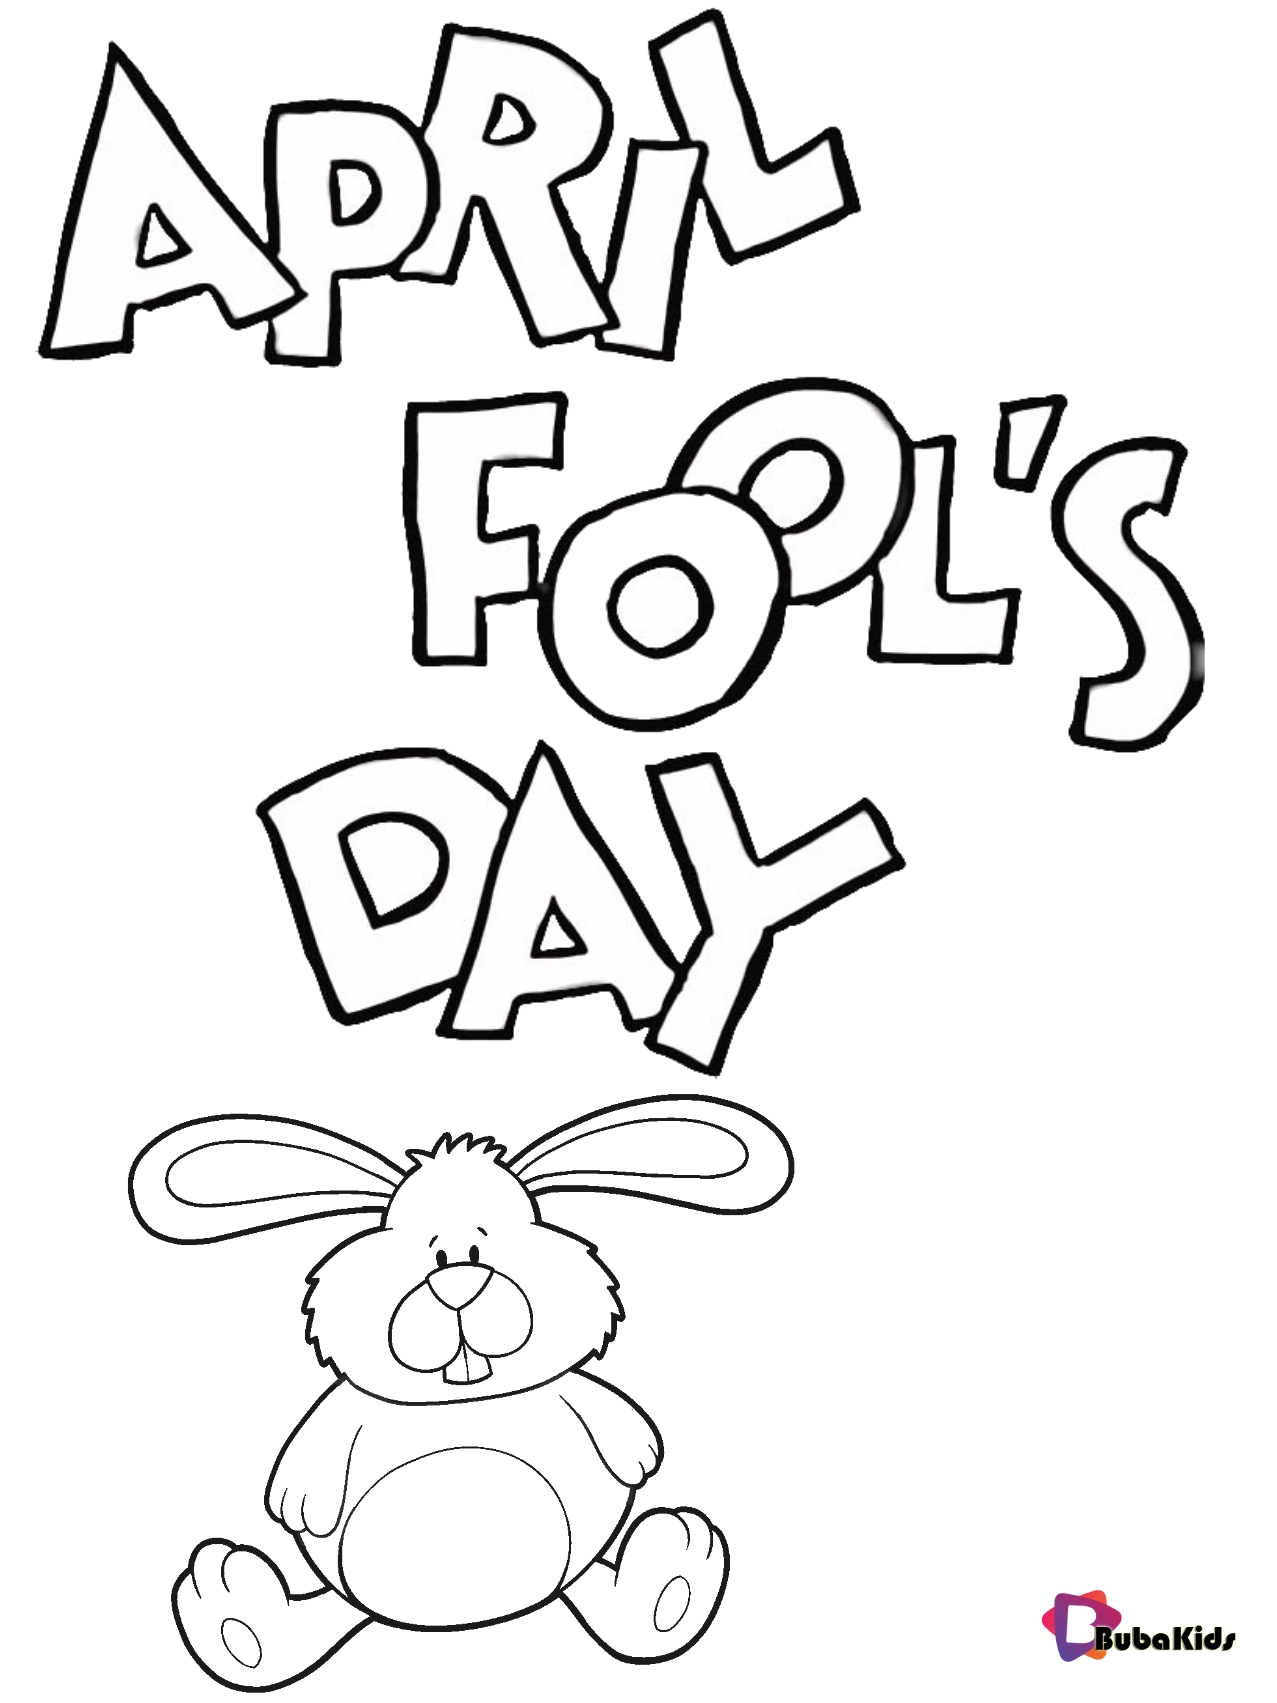 April fools day bunny coloring pages Wallpaper